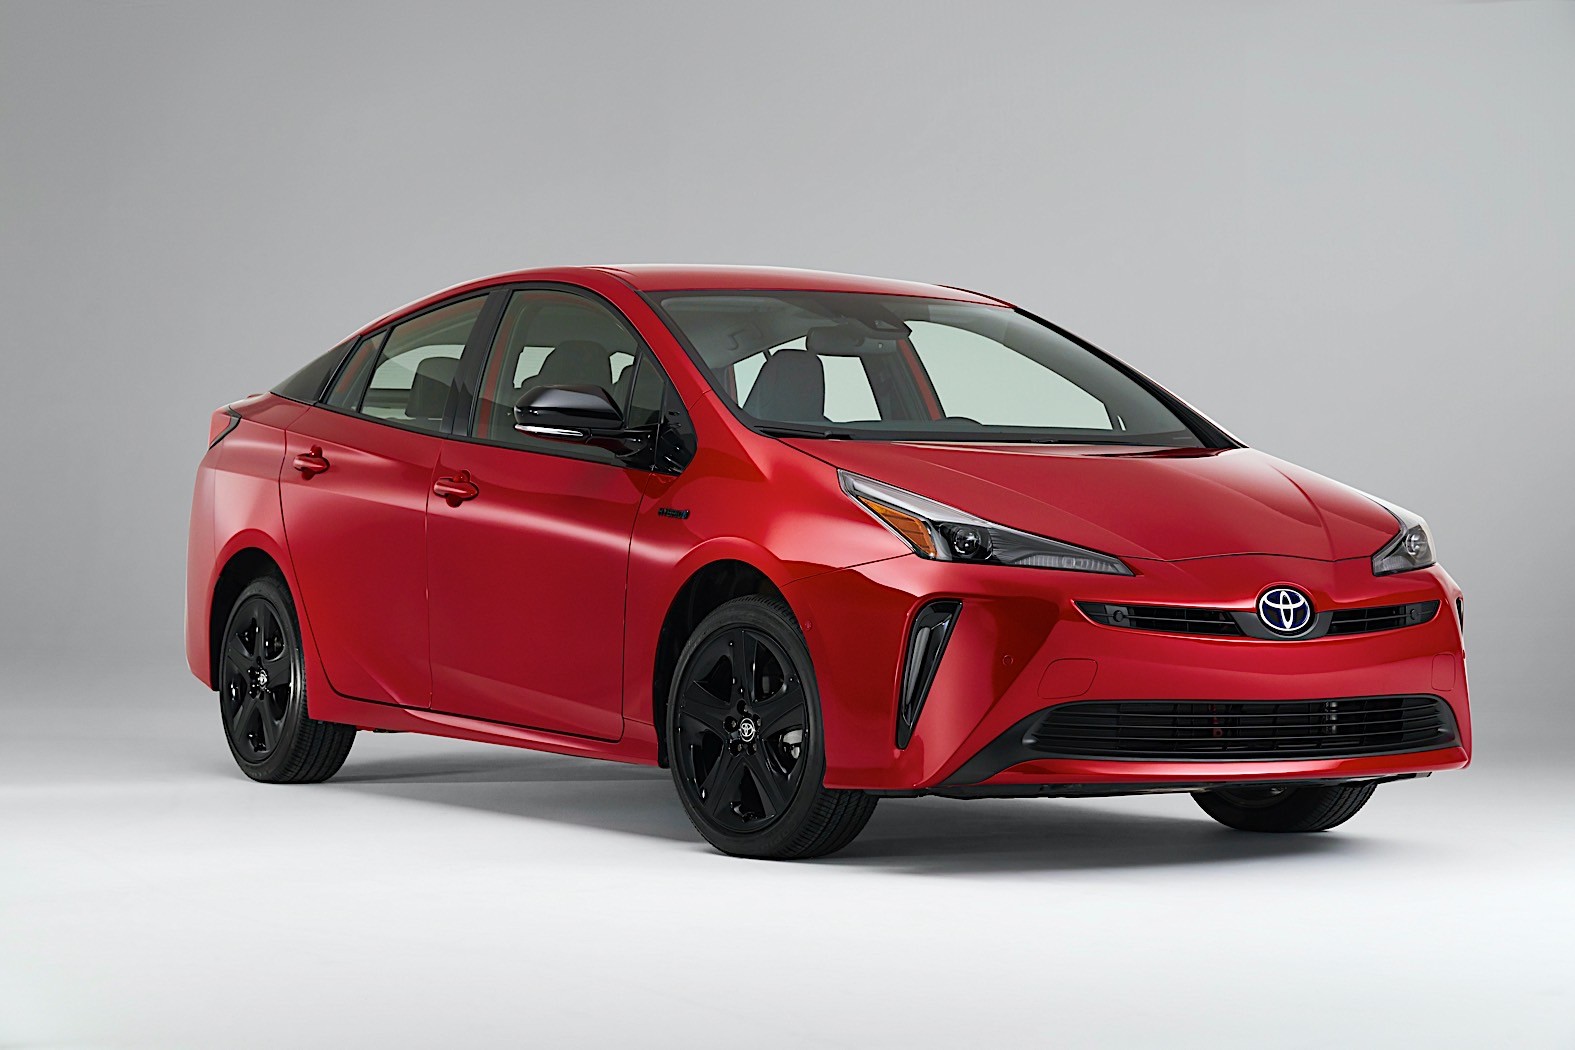 Supersonic Red Toyota Prius Is a Nod to the Original American Market